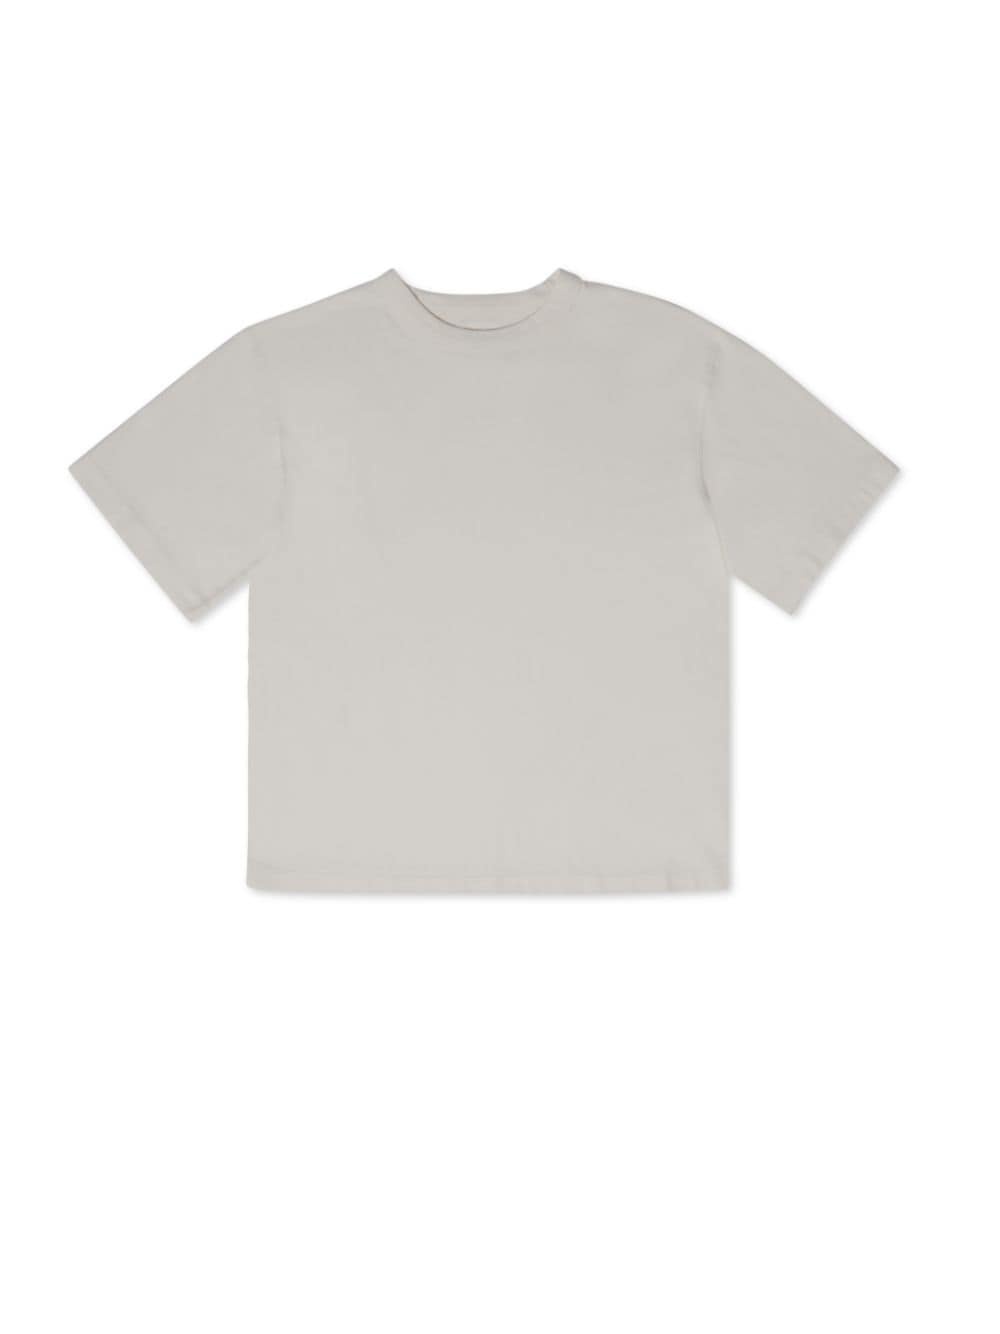 NF EX-RAY RECYCLED CO SS TEE - 1